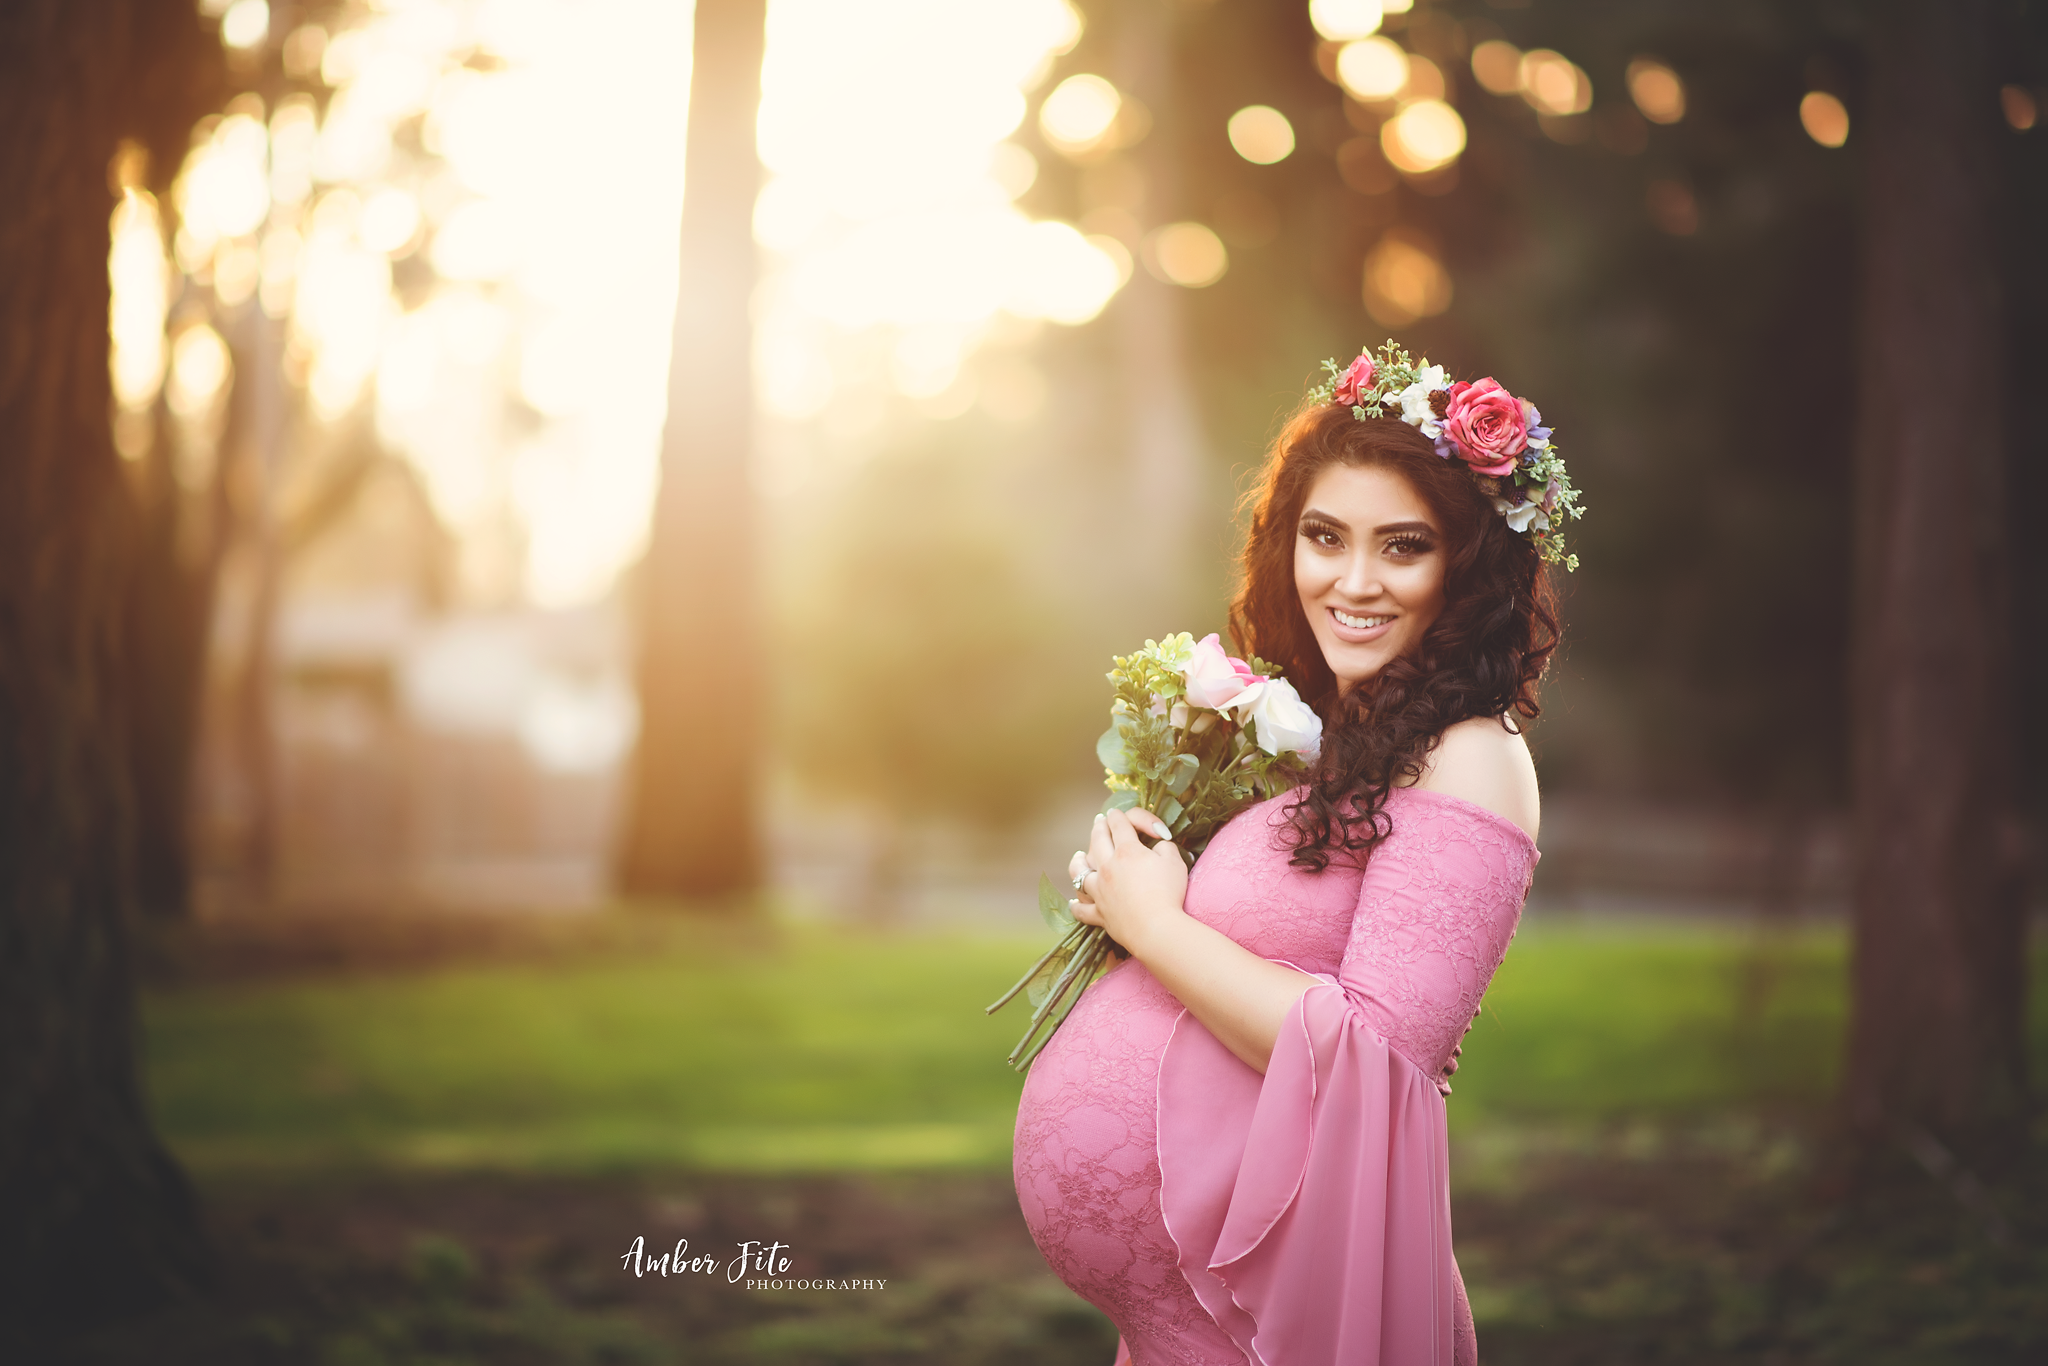 Amber Fite Photography - Maternity Portraits 